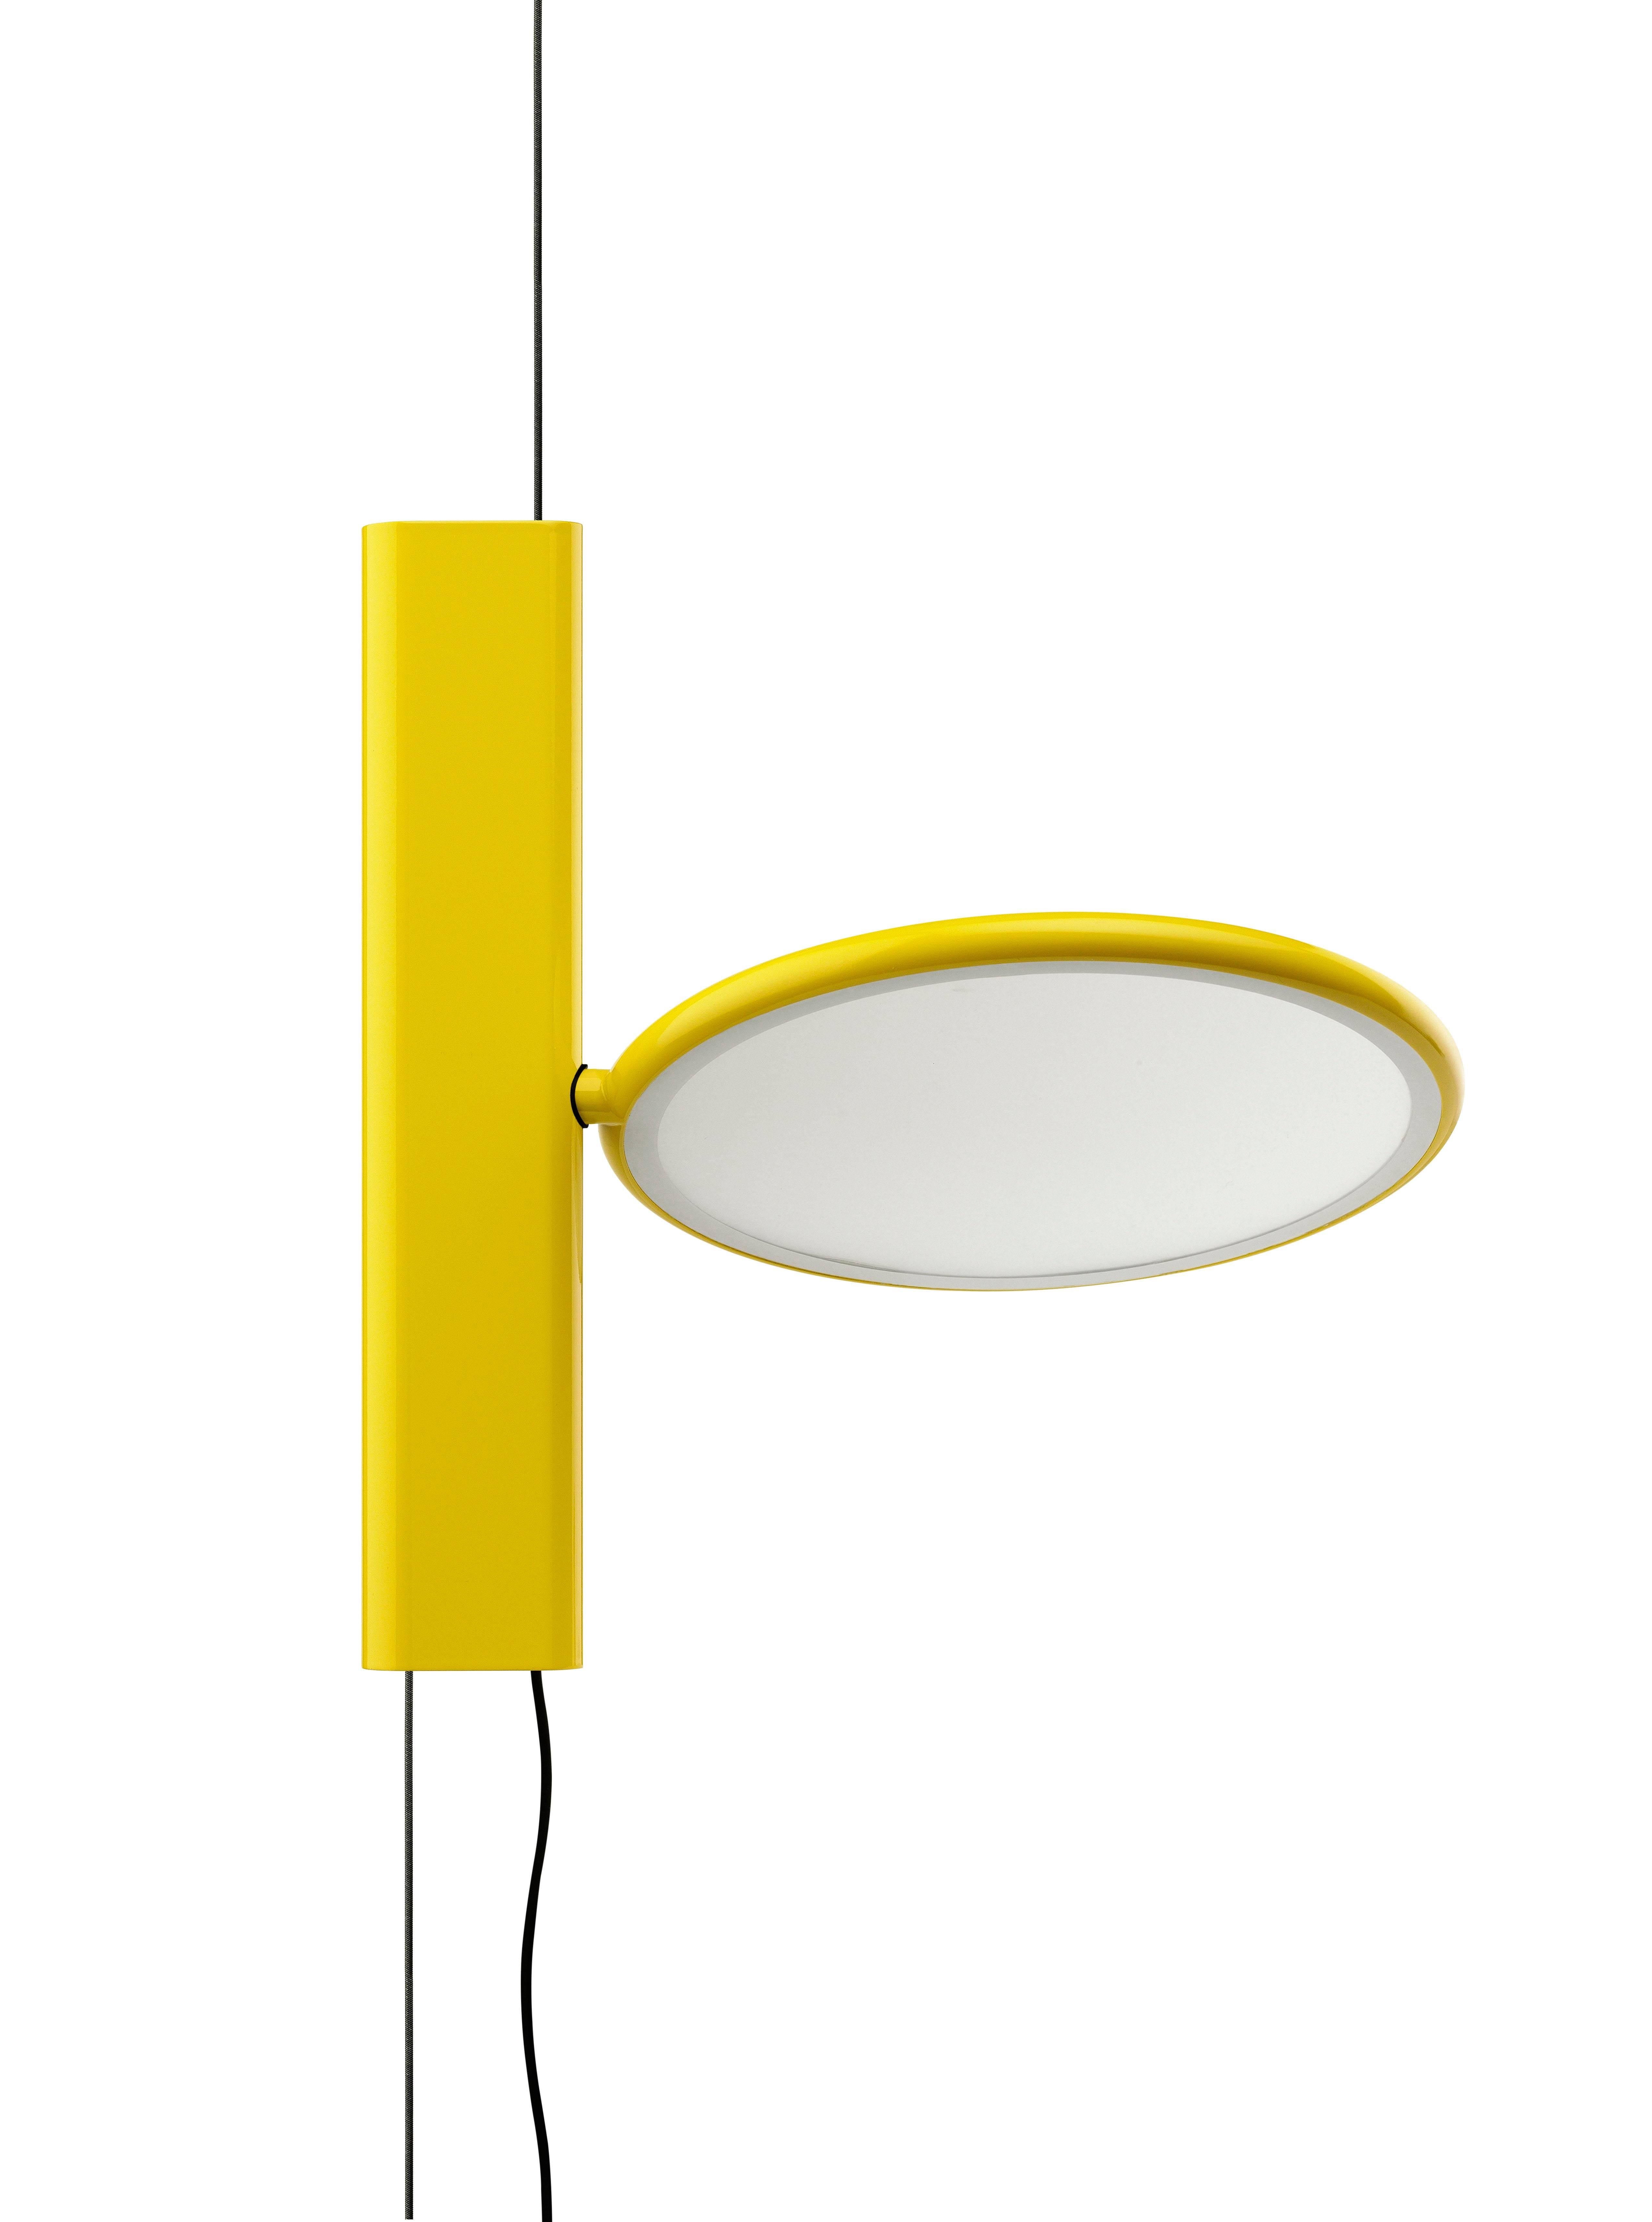 A pendant light that feels as at home in an industrial space as it would in museum exhibit: The OK Light plays with expectations to provide functional light that is surprising and easily directed. It features an ultra-flat LED surface with